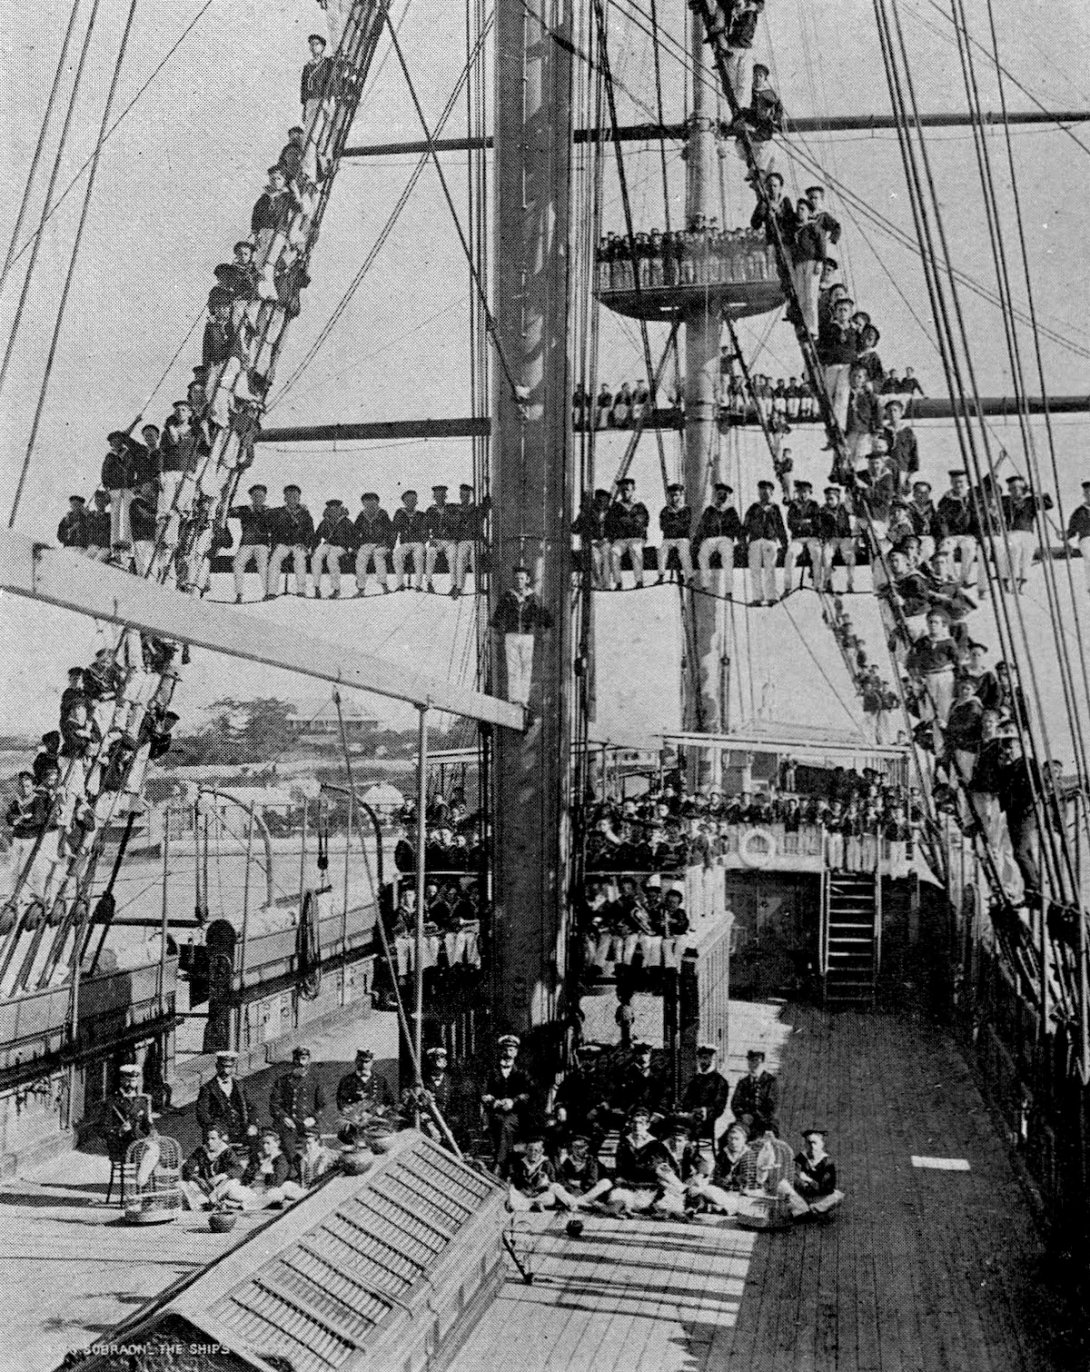 Many school aged children wearing uniforms and sitting on the deck and up on the mast of a ship